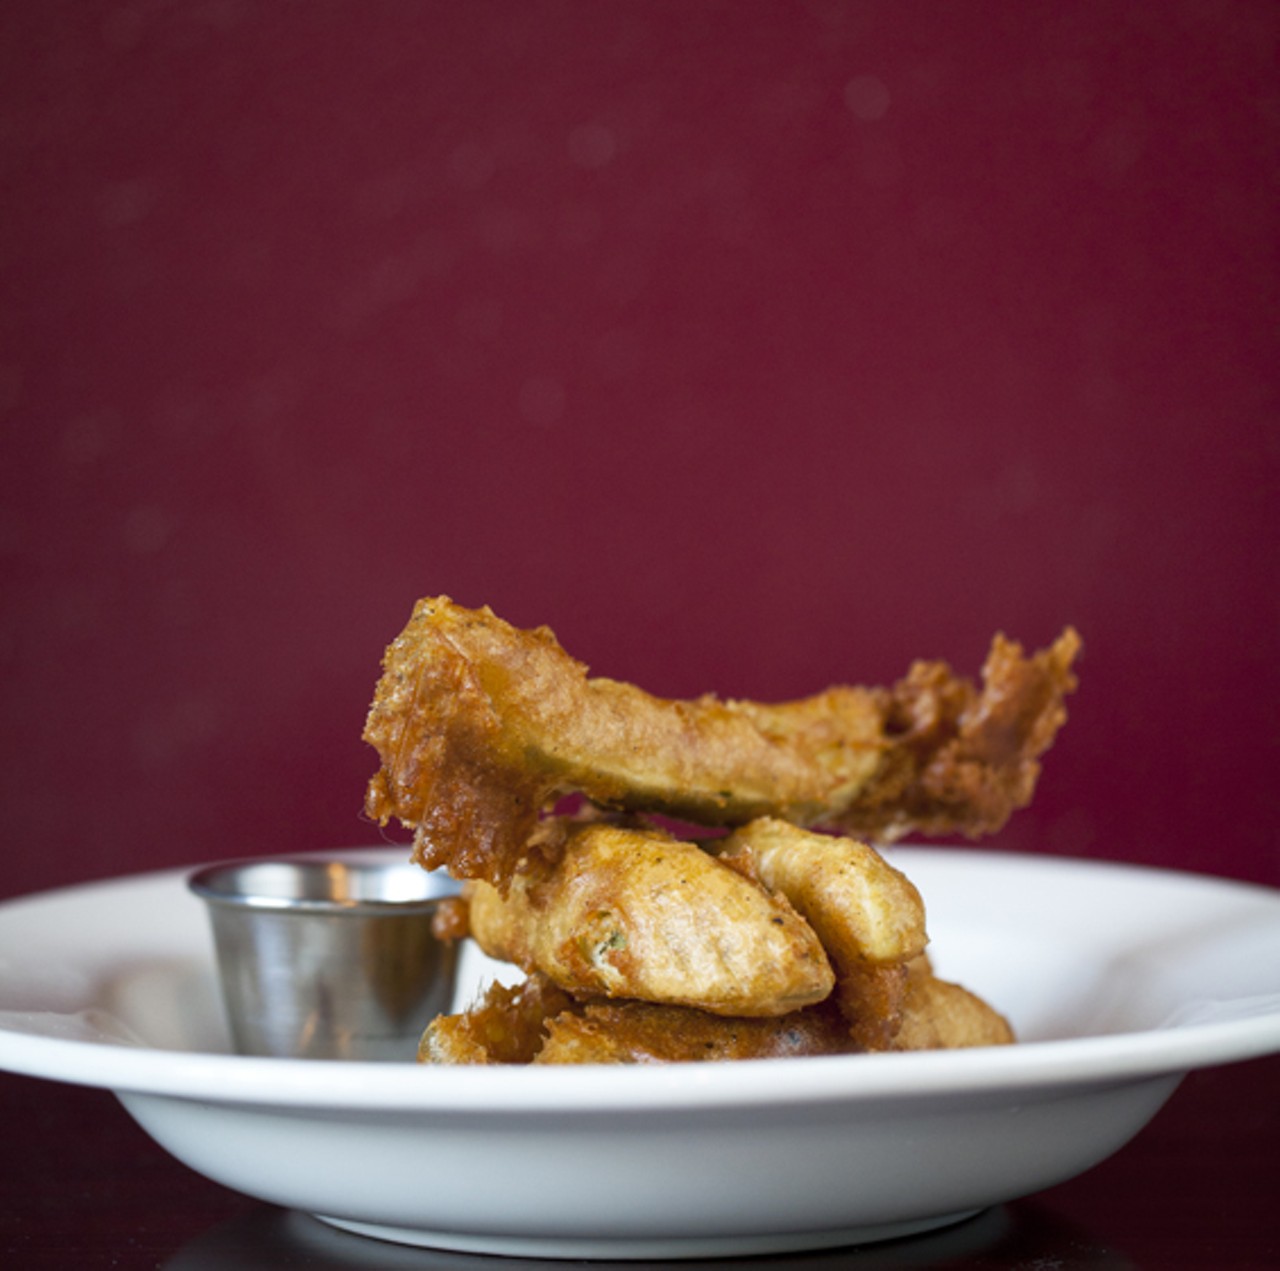 An appetizer of Fried Pickles with the housemade jalapeno watermelon BBQ sauce.